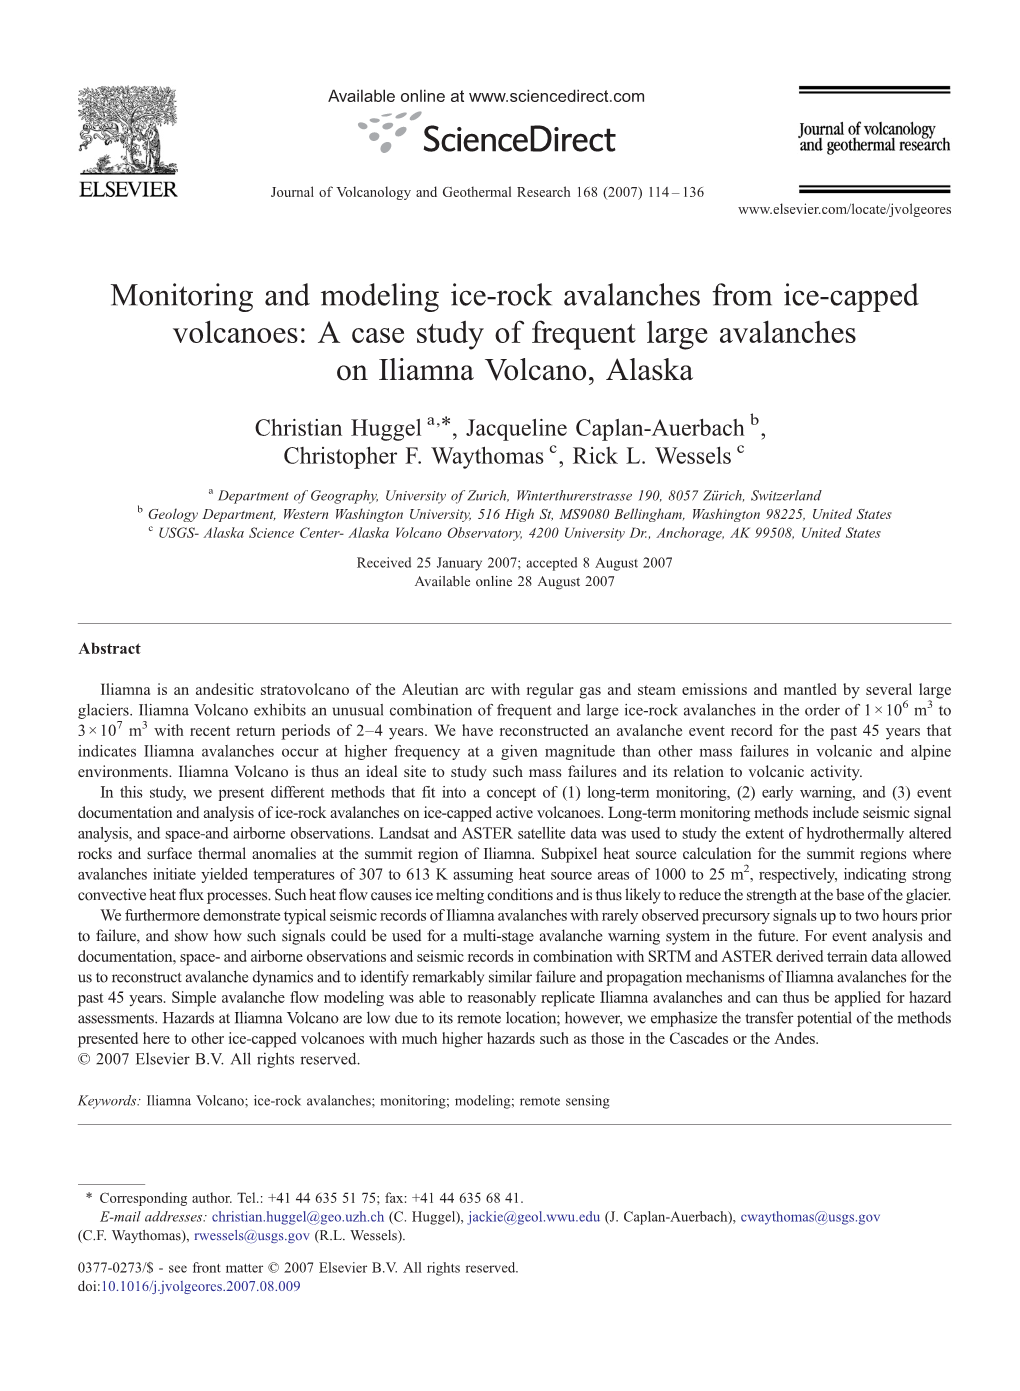 Monitoring and Modeling Ice-Rock